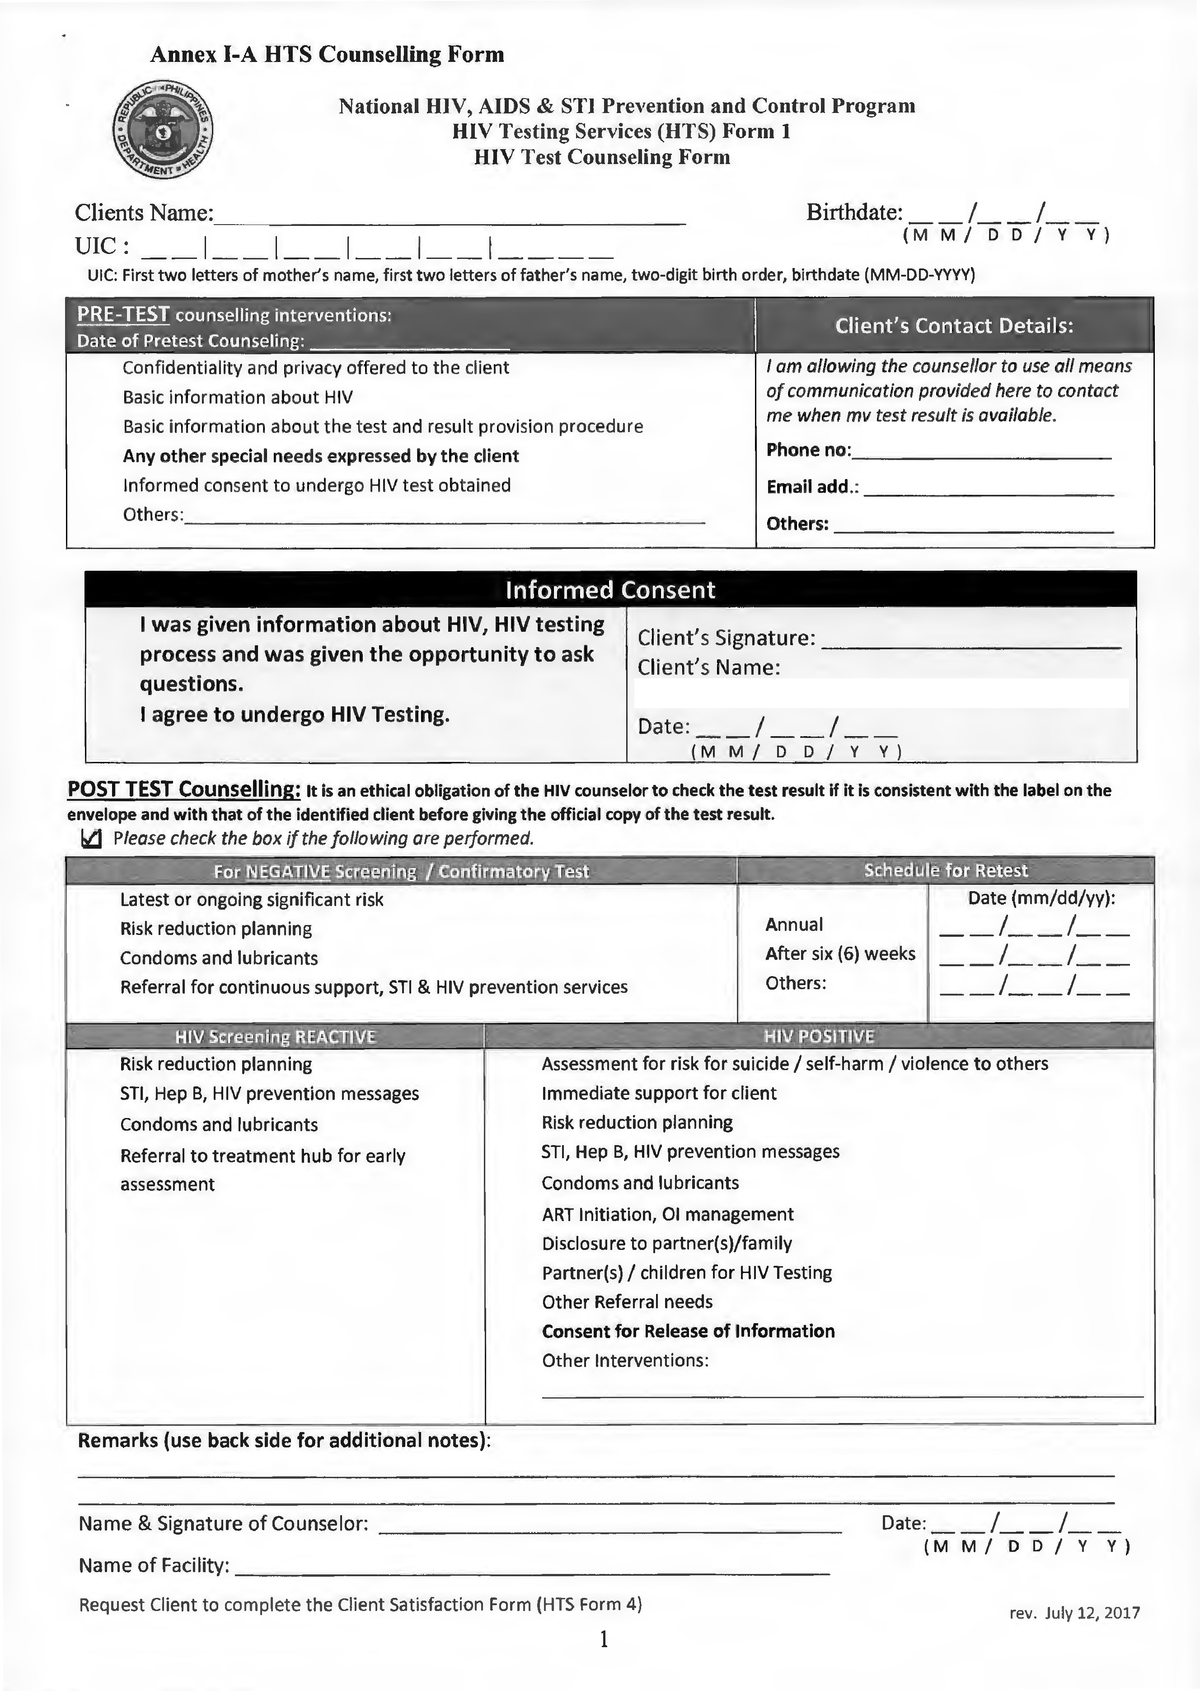 02 annex i a hts counselling form - Annex 1-A HTS Counselling Form ...